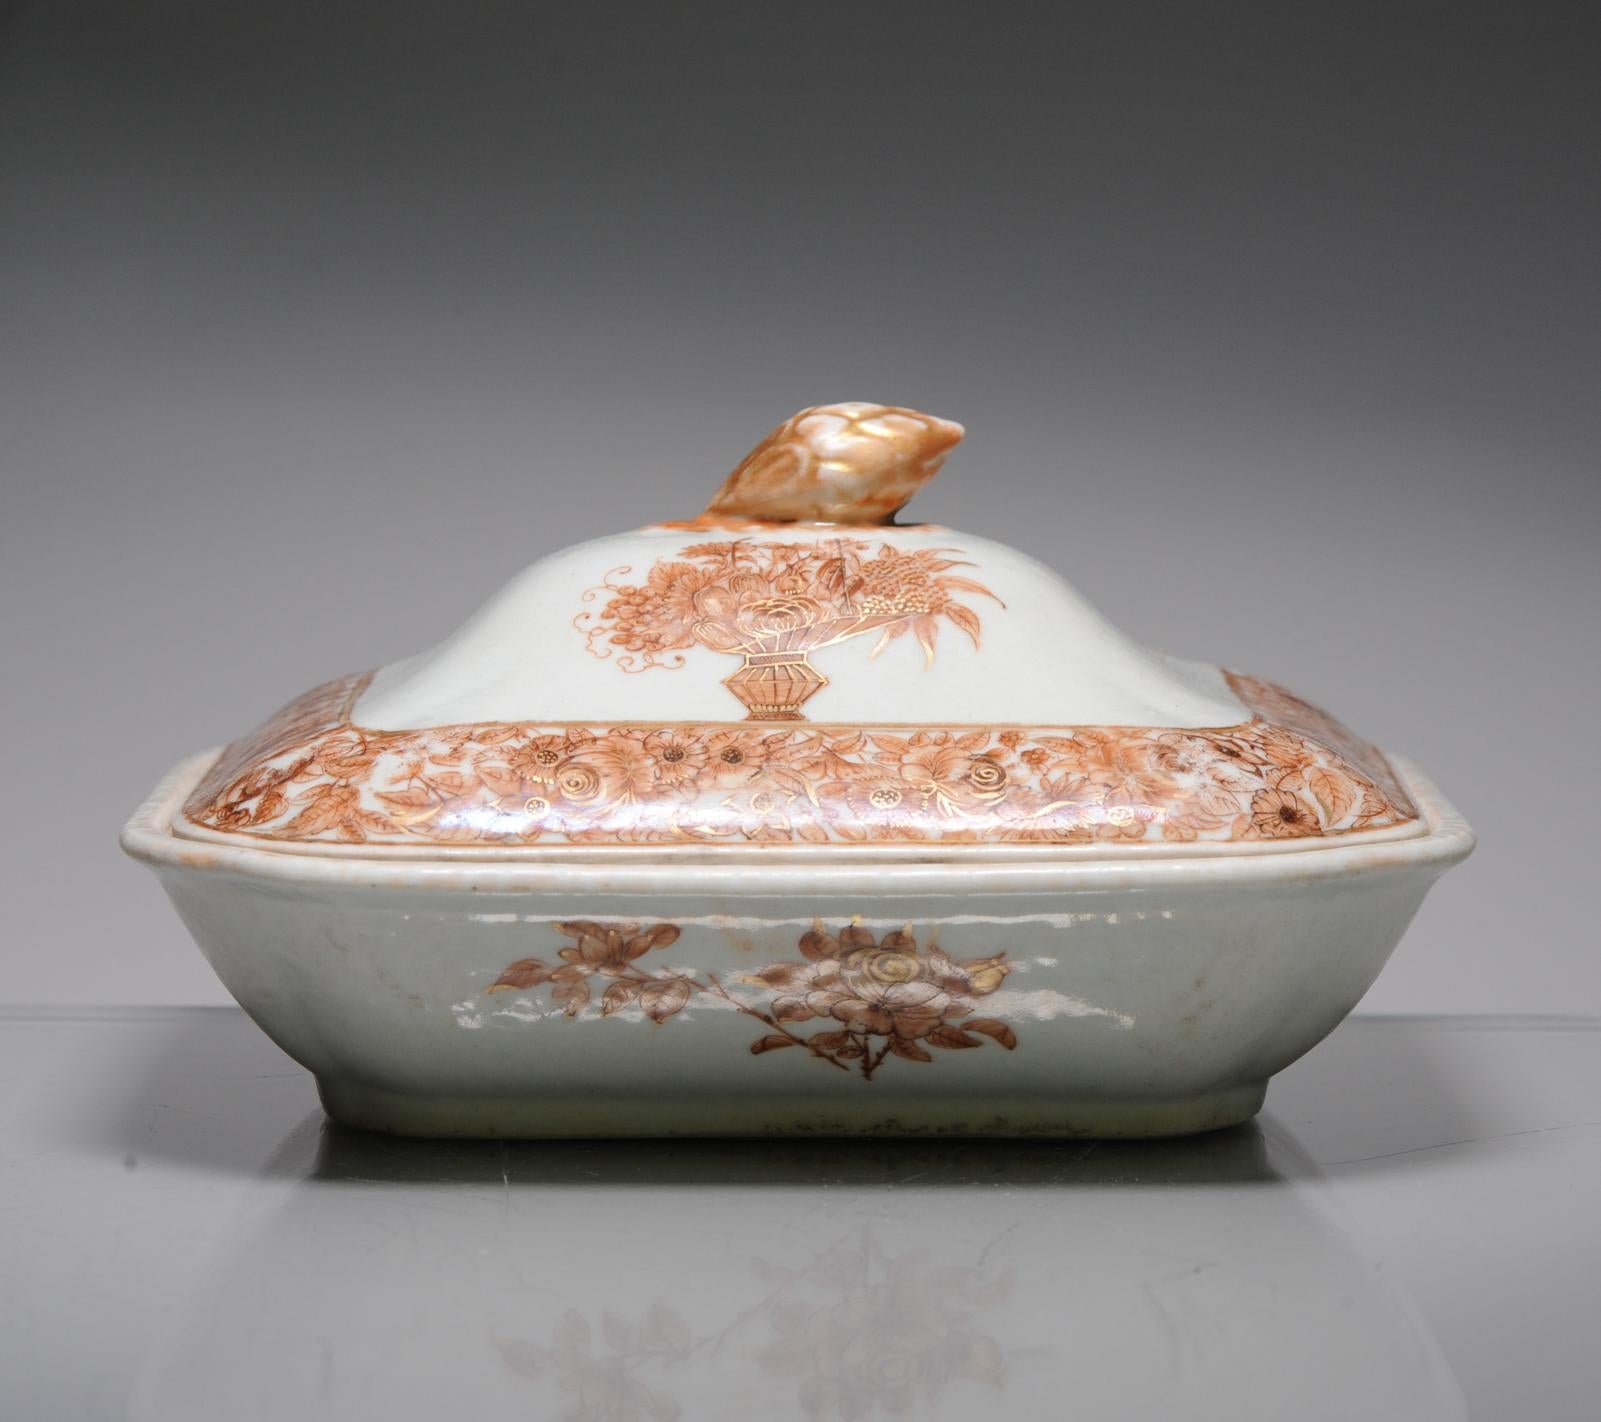 A rare, good conditioned, and quality painted tureen.

Very nicely decorated piece with good details. Sepia and gilt decoration of flowers and flower basket.

Probably Jiaqing period (1796-1820)

A very nicely decorated plate. Rare type of